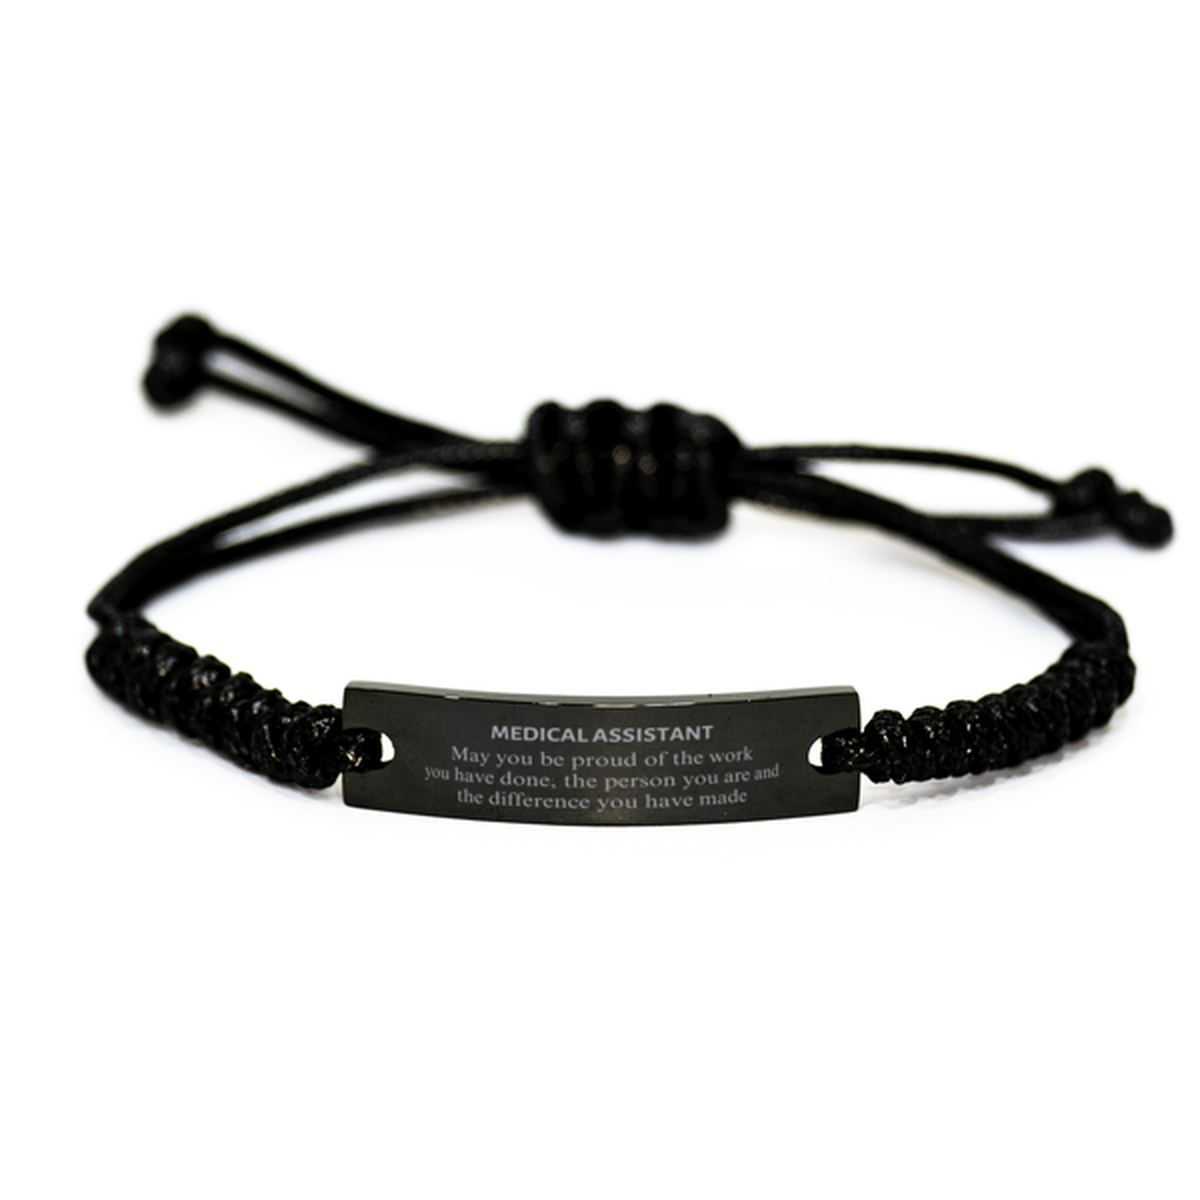 Medical Assistant May you be proud of the work you have done, Retirement Medical Assistant Black Rope Bracelet for Colleague Appreciation Gifts Amazing for Medical Assistant